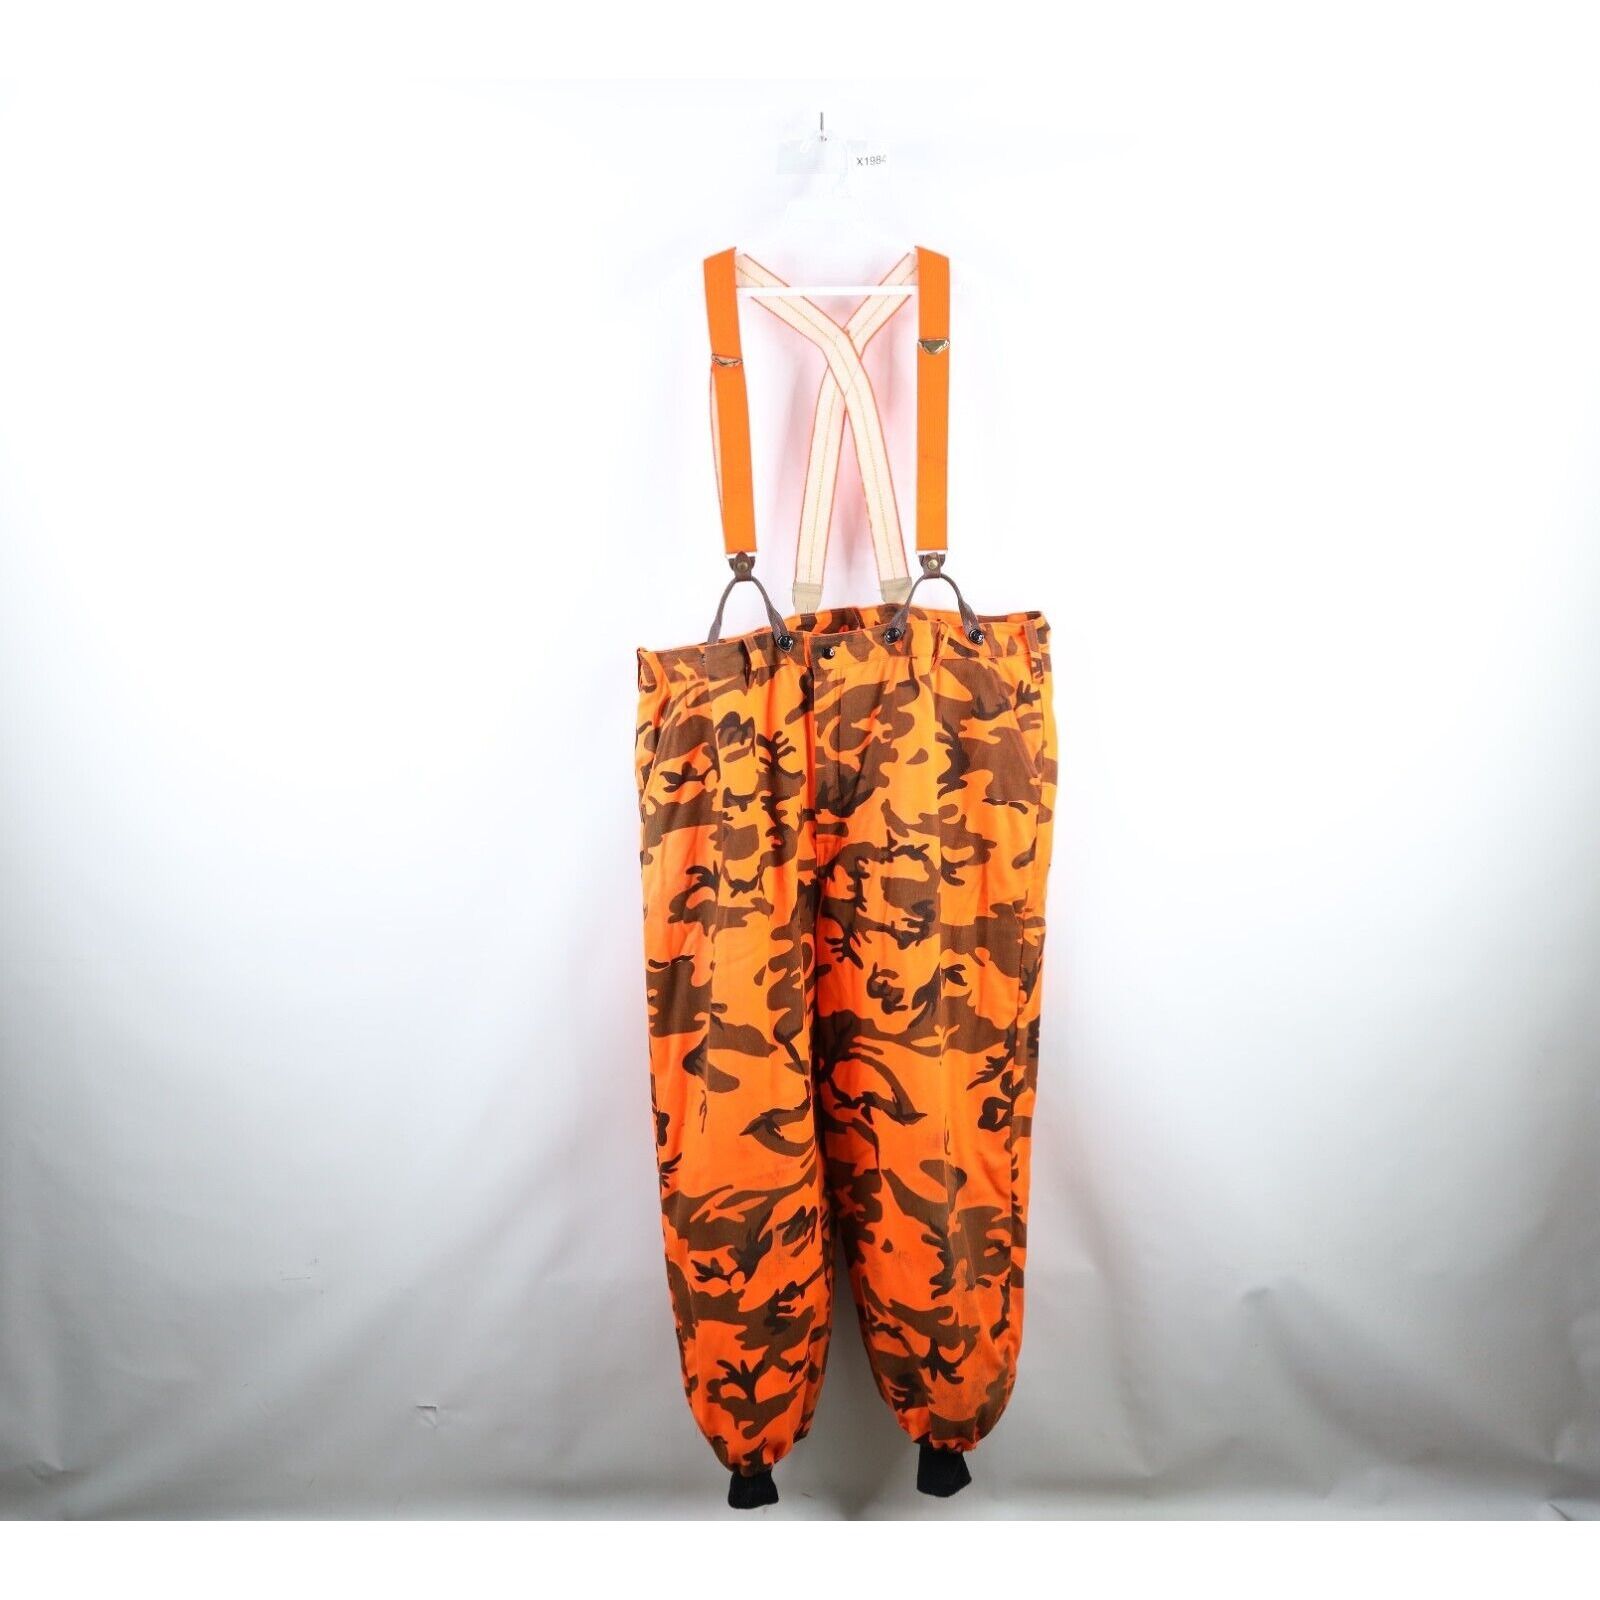 Vintage Vintage 70s Streetwear 3XL Insulated Camouflage Overalls Size US 44 / EU 60 - 1 Preview